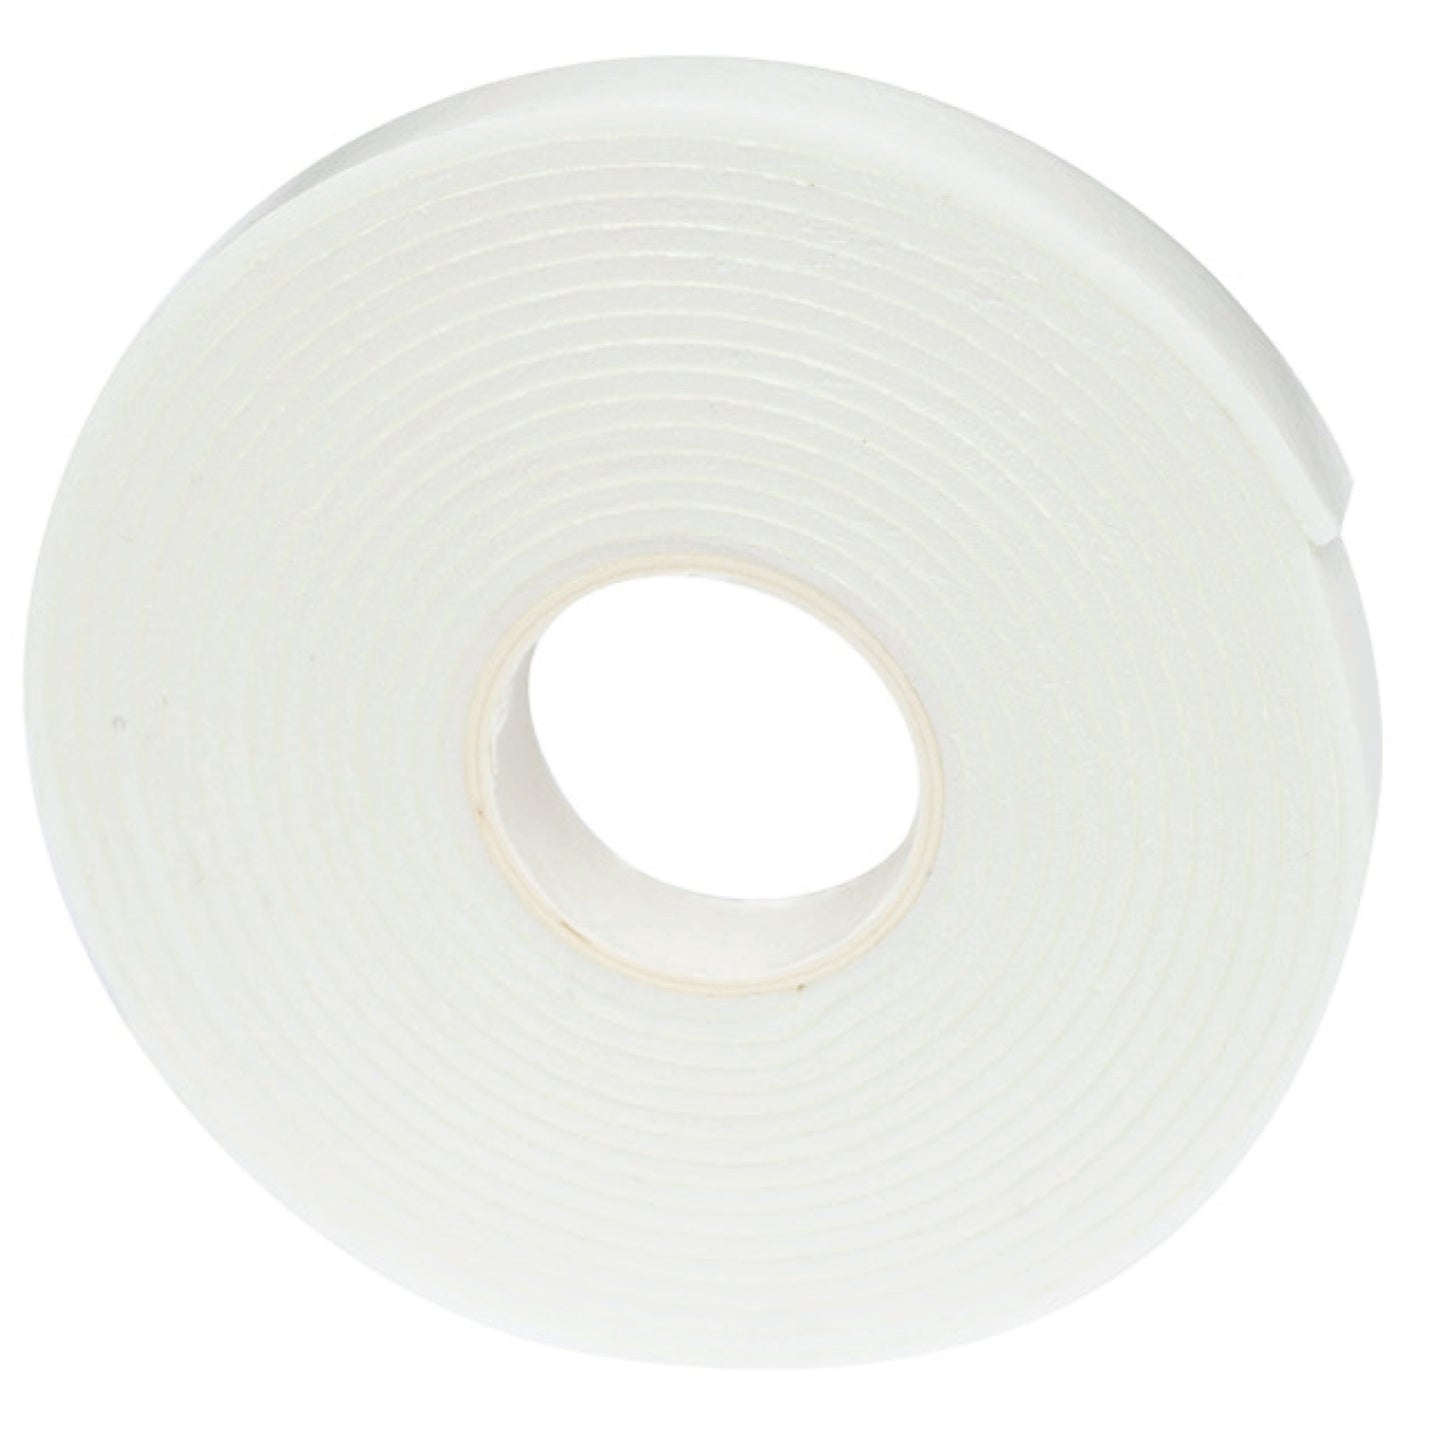 Sticky Thumb Double-Sided Foam Tape 3.94 Yards-White, 0.50"X2mm